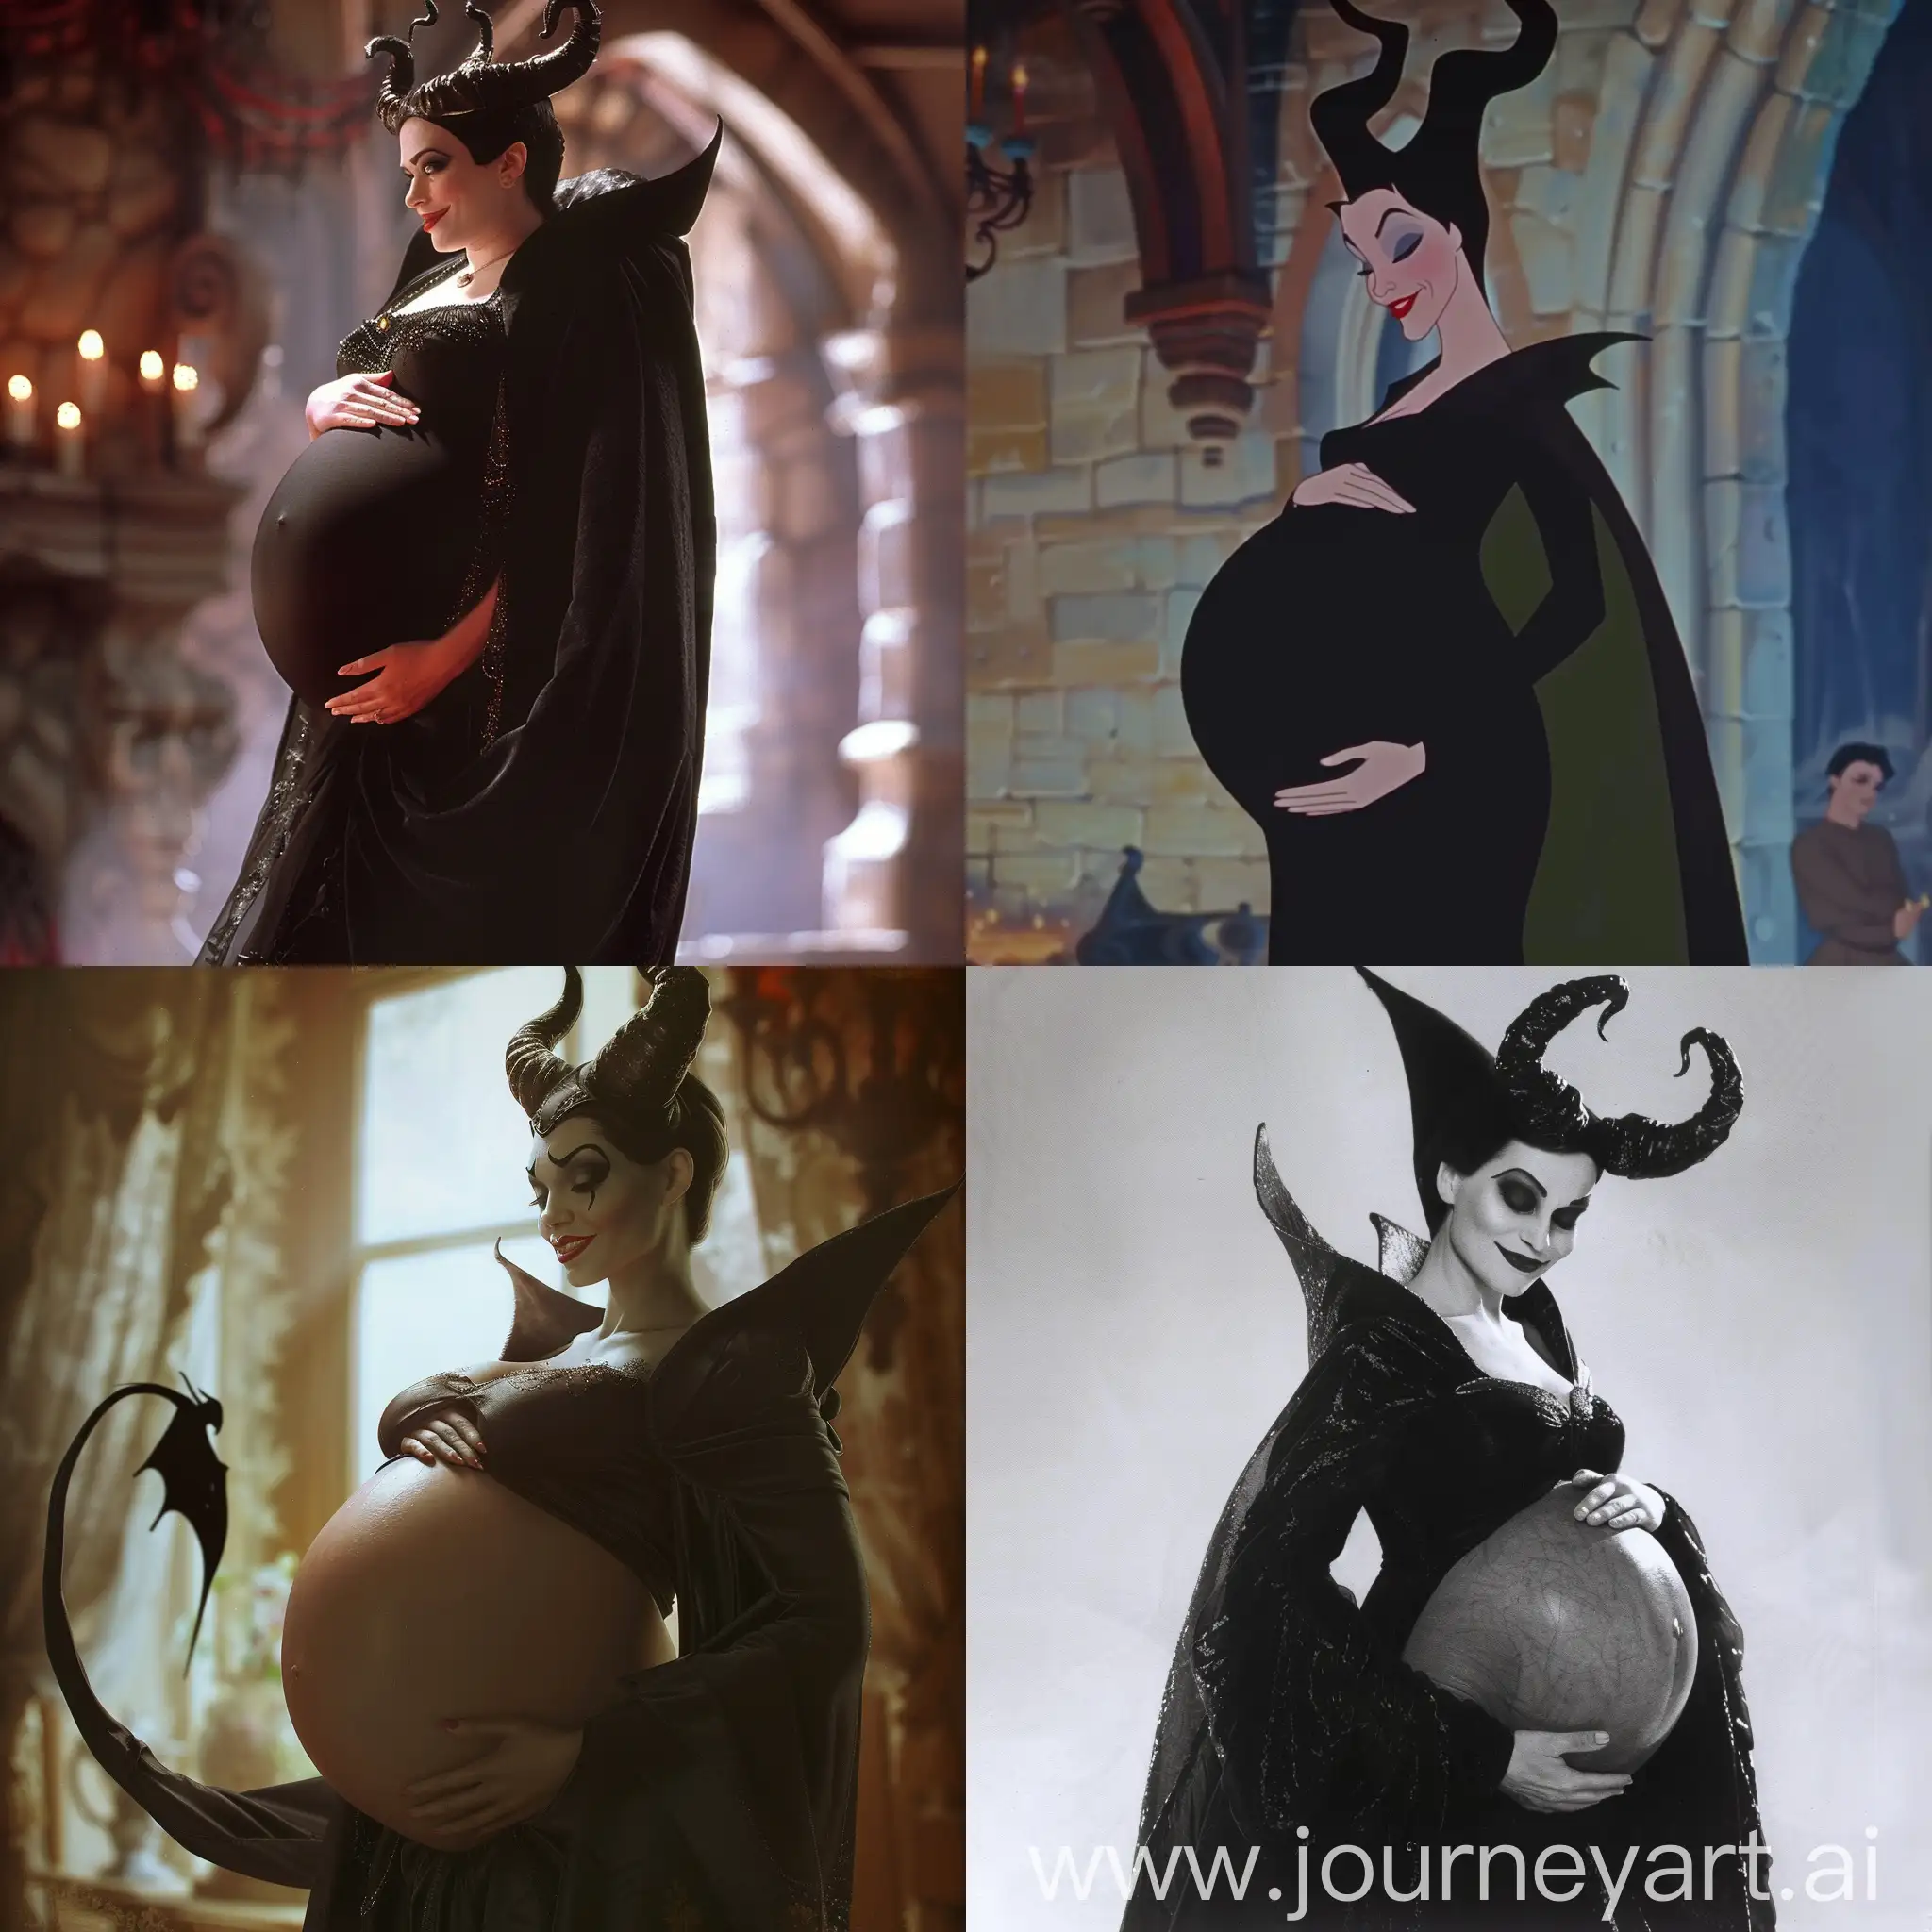 Maleficent, VERY Pregnant, Her pregnant belly is very large, Bare Belly